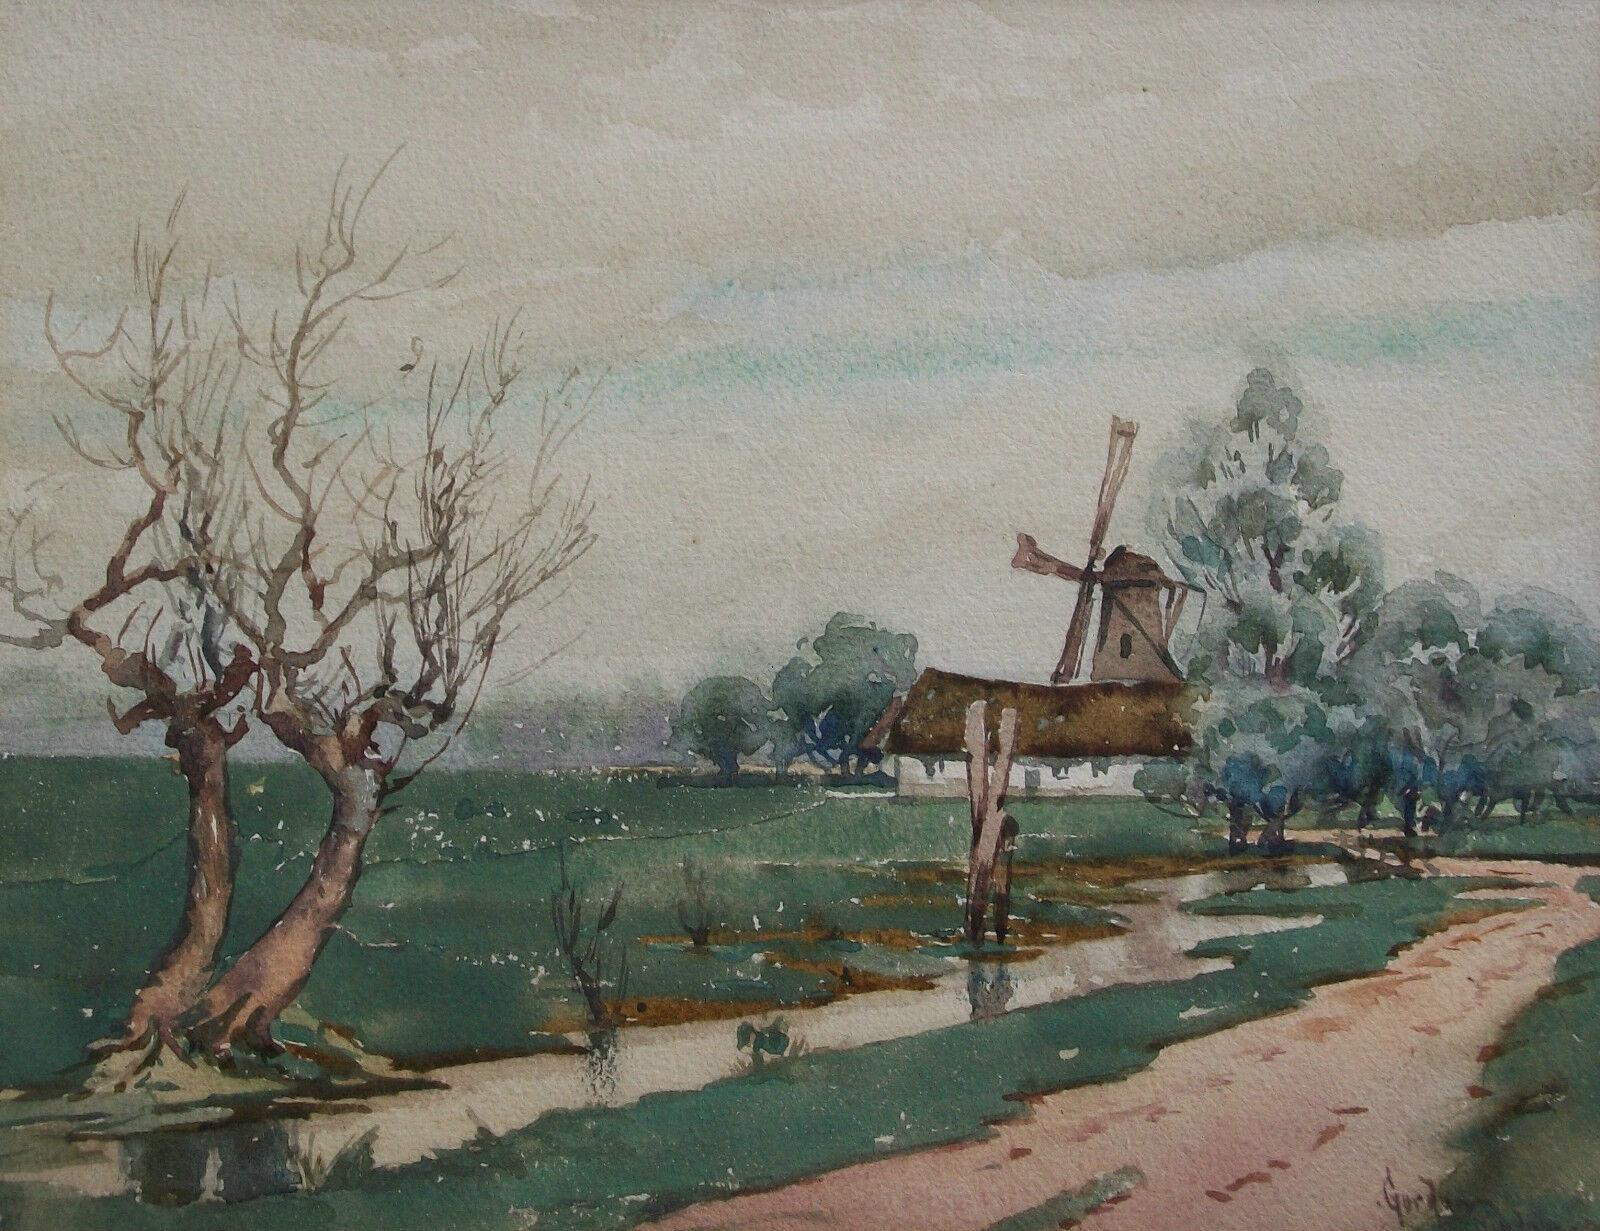 GORDON NIELSON - Antique Dutch school watercolor painting on paperboard - signed and dated lower right - contained in the original vintage matte - unframed - Europe - circa 1878.

Excellent vintage condition - no loss - no damage - no restoration